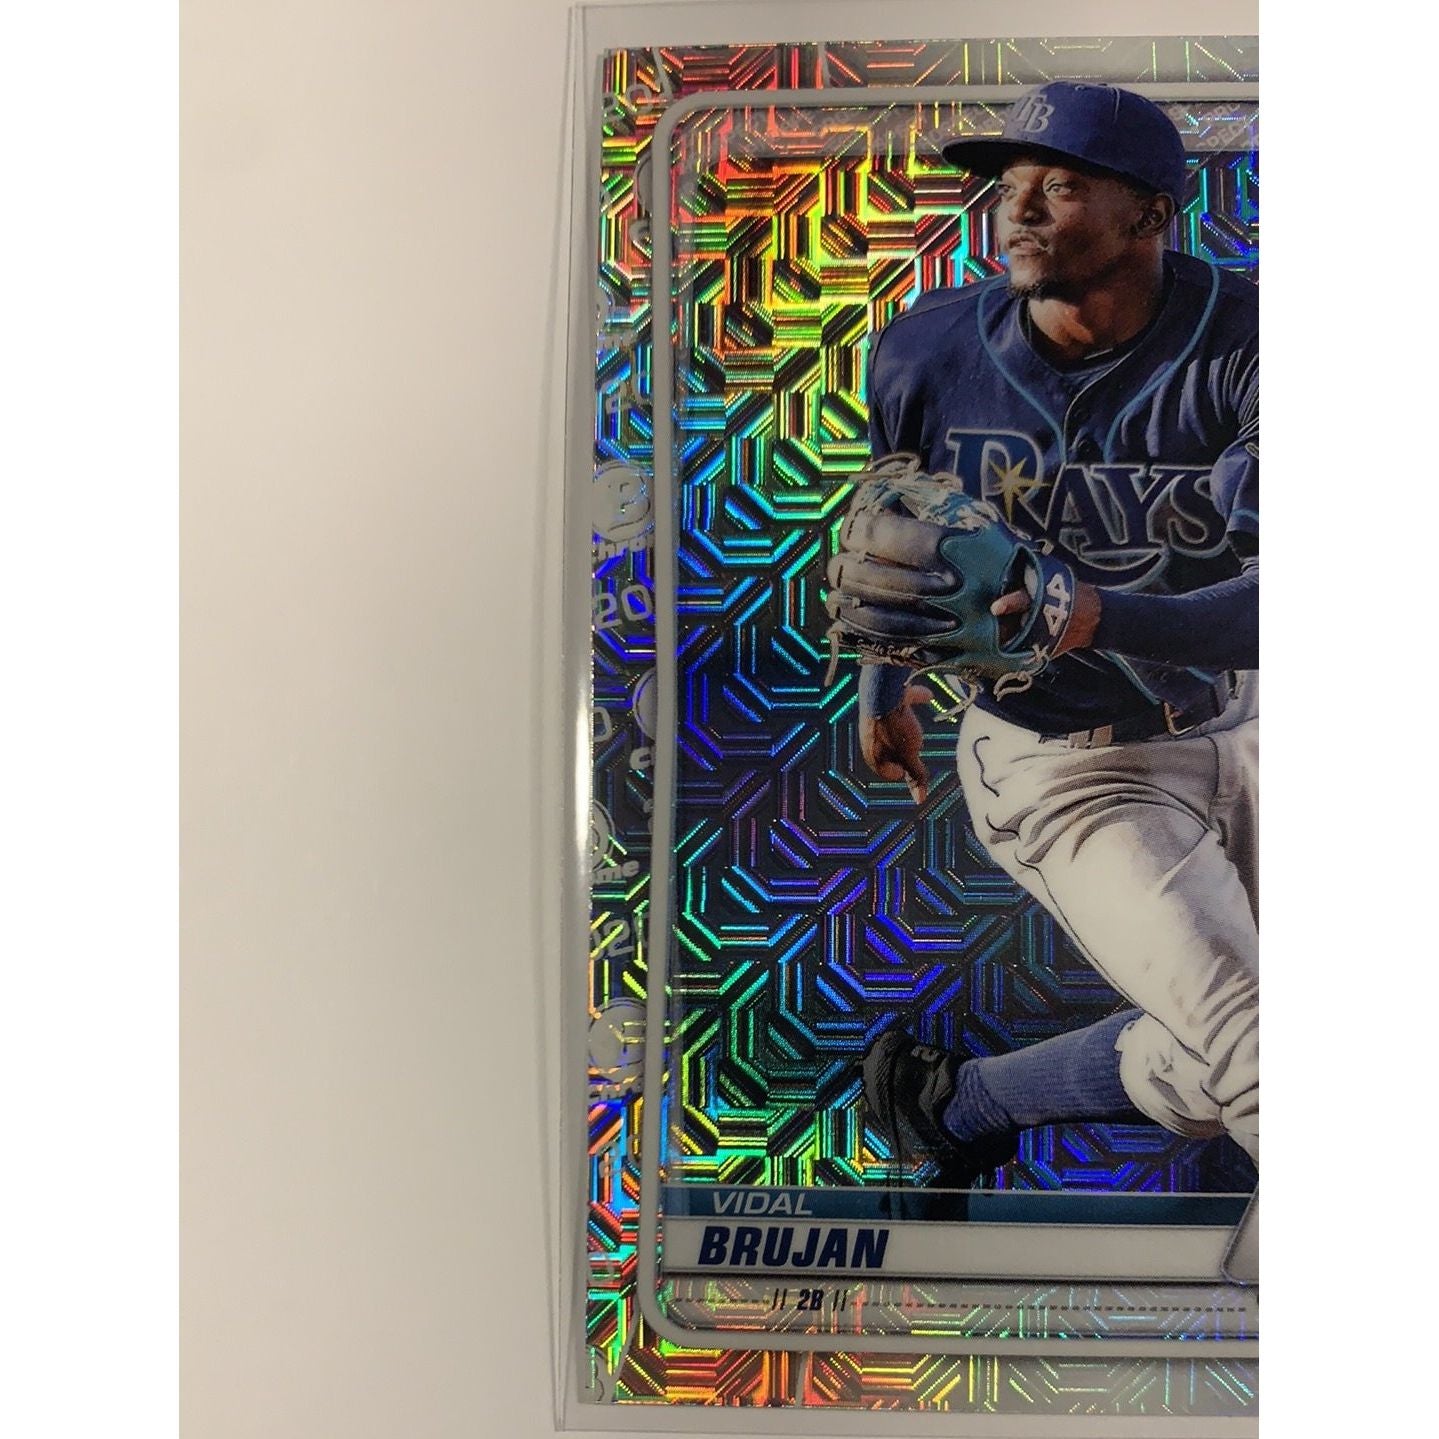  2020 Bowman Chrome Vidal Brujan Mojo Refractor  Local Legends Cards & Collectibles